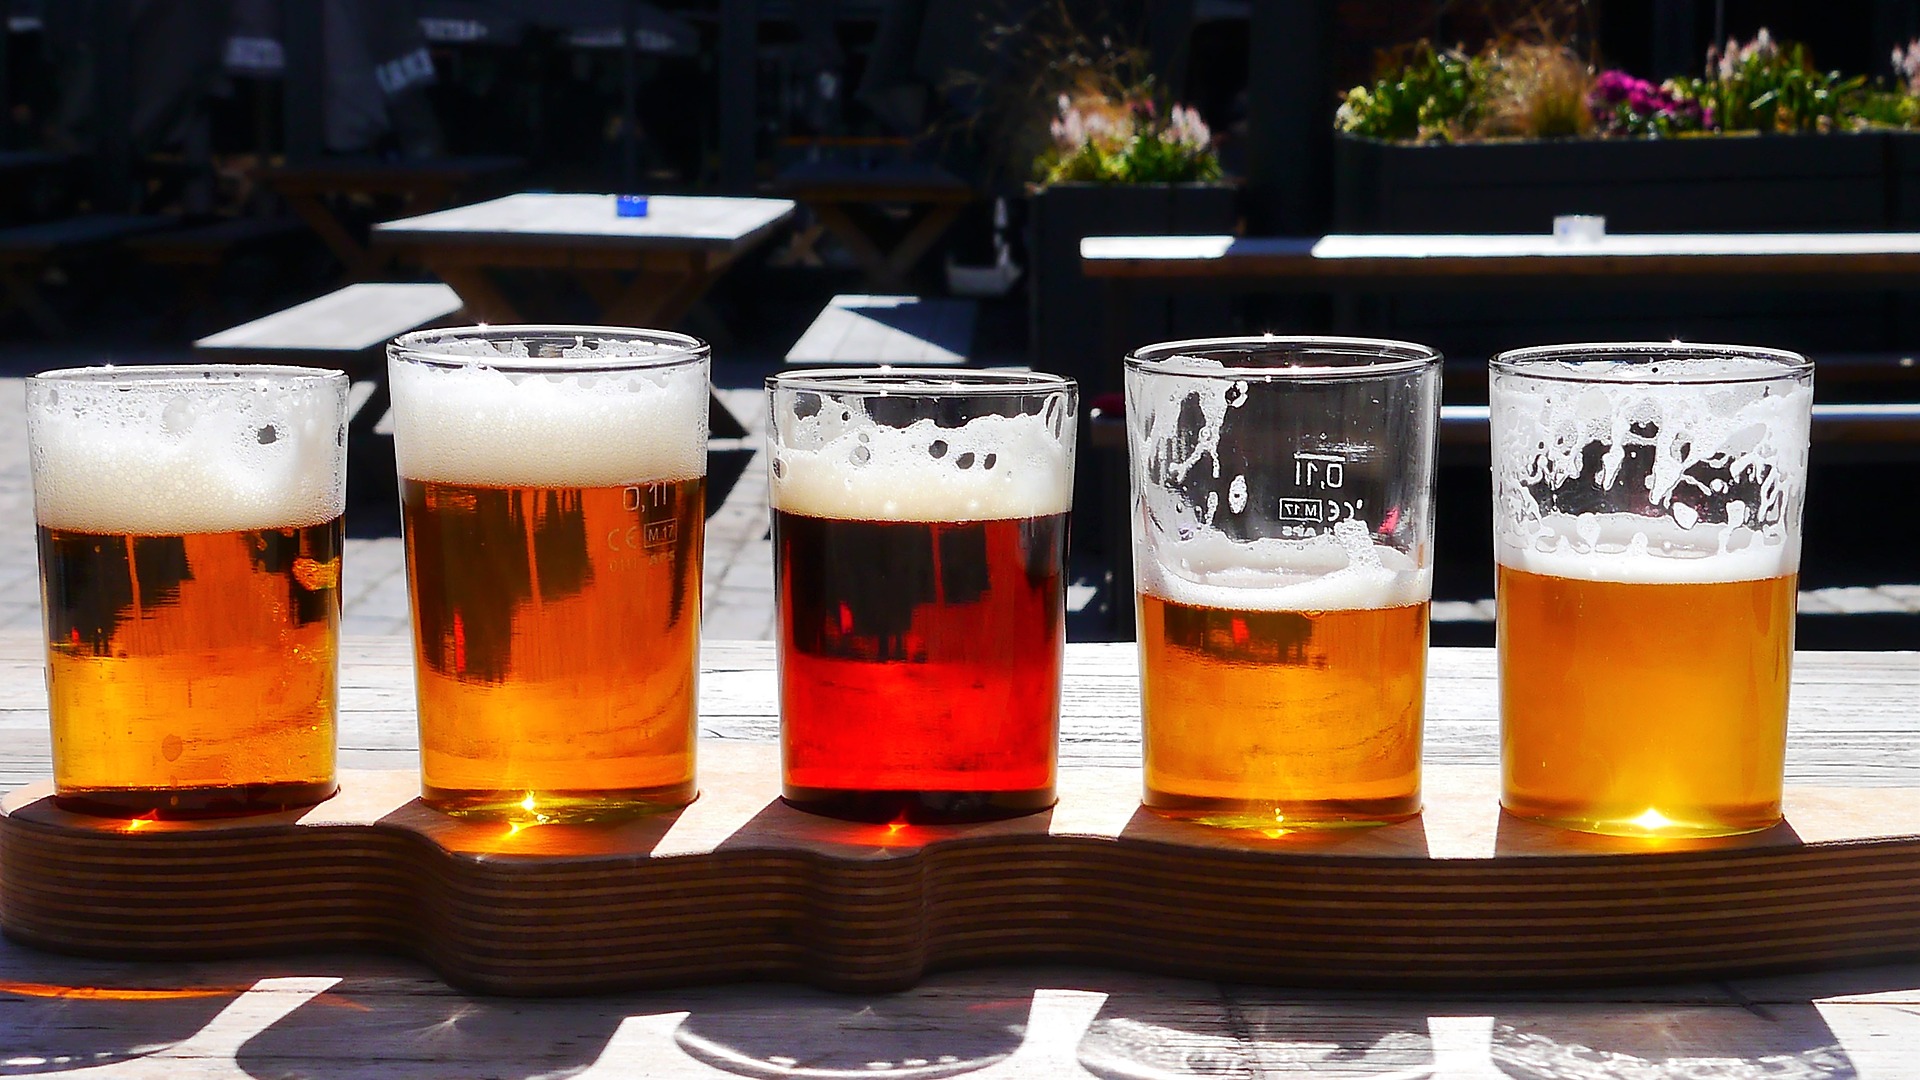 Our Guide to Tasting Craft Beer for First-Timers – What to Know